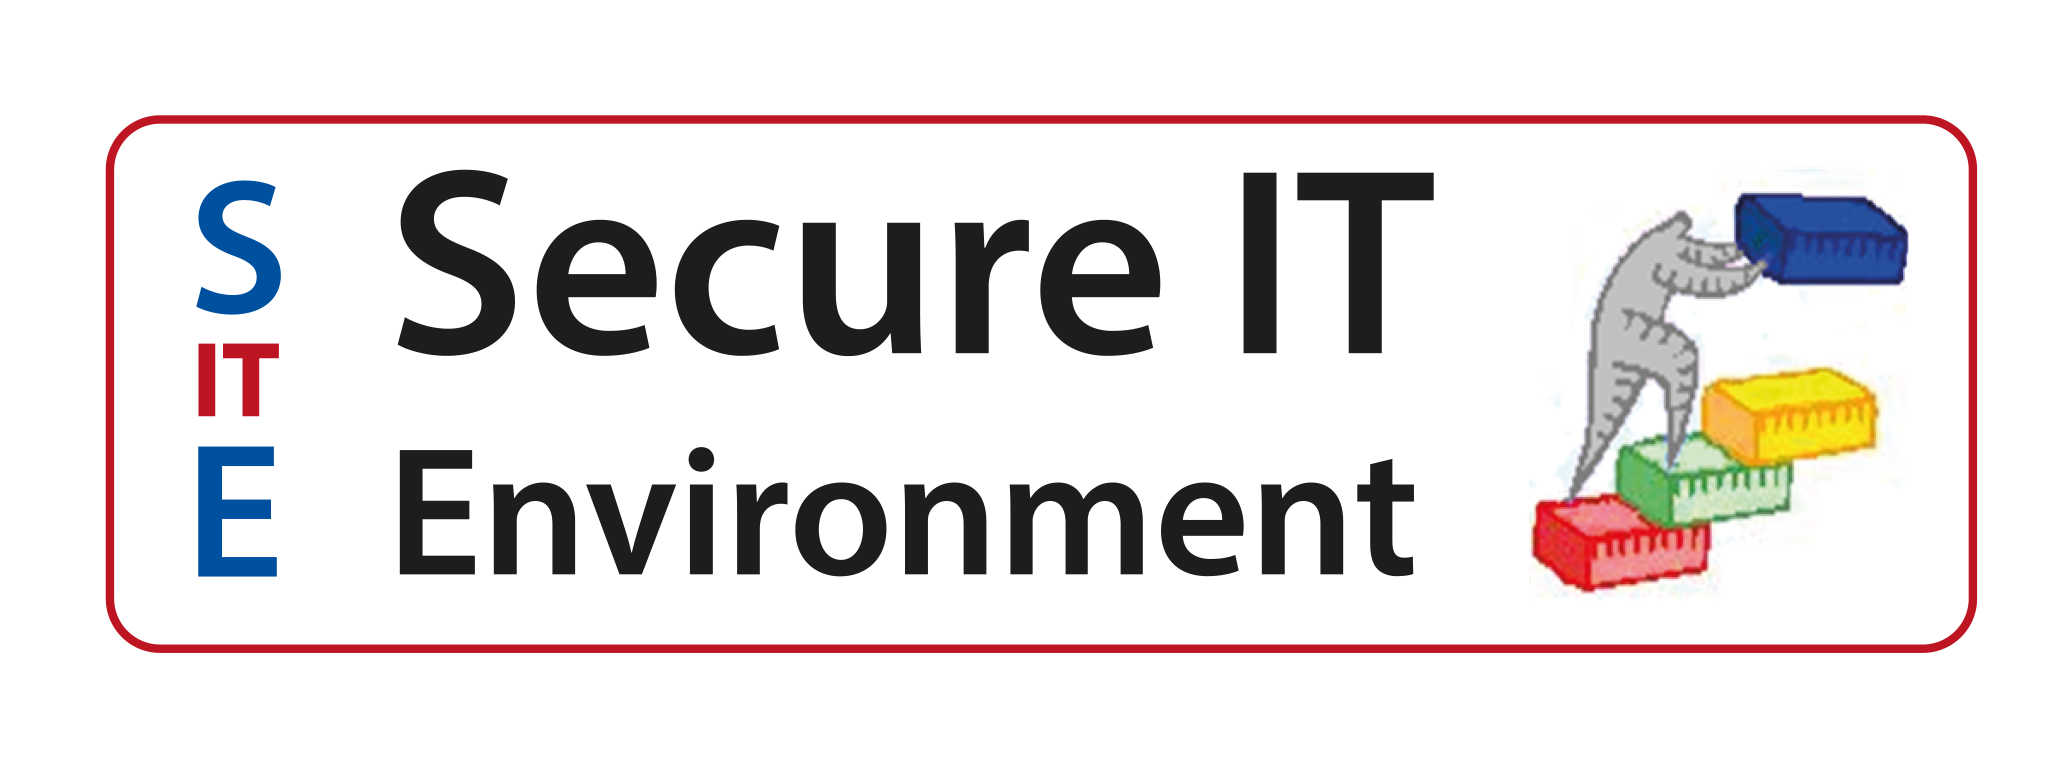 Secure IT Environment AS